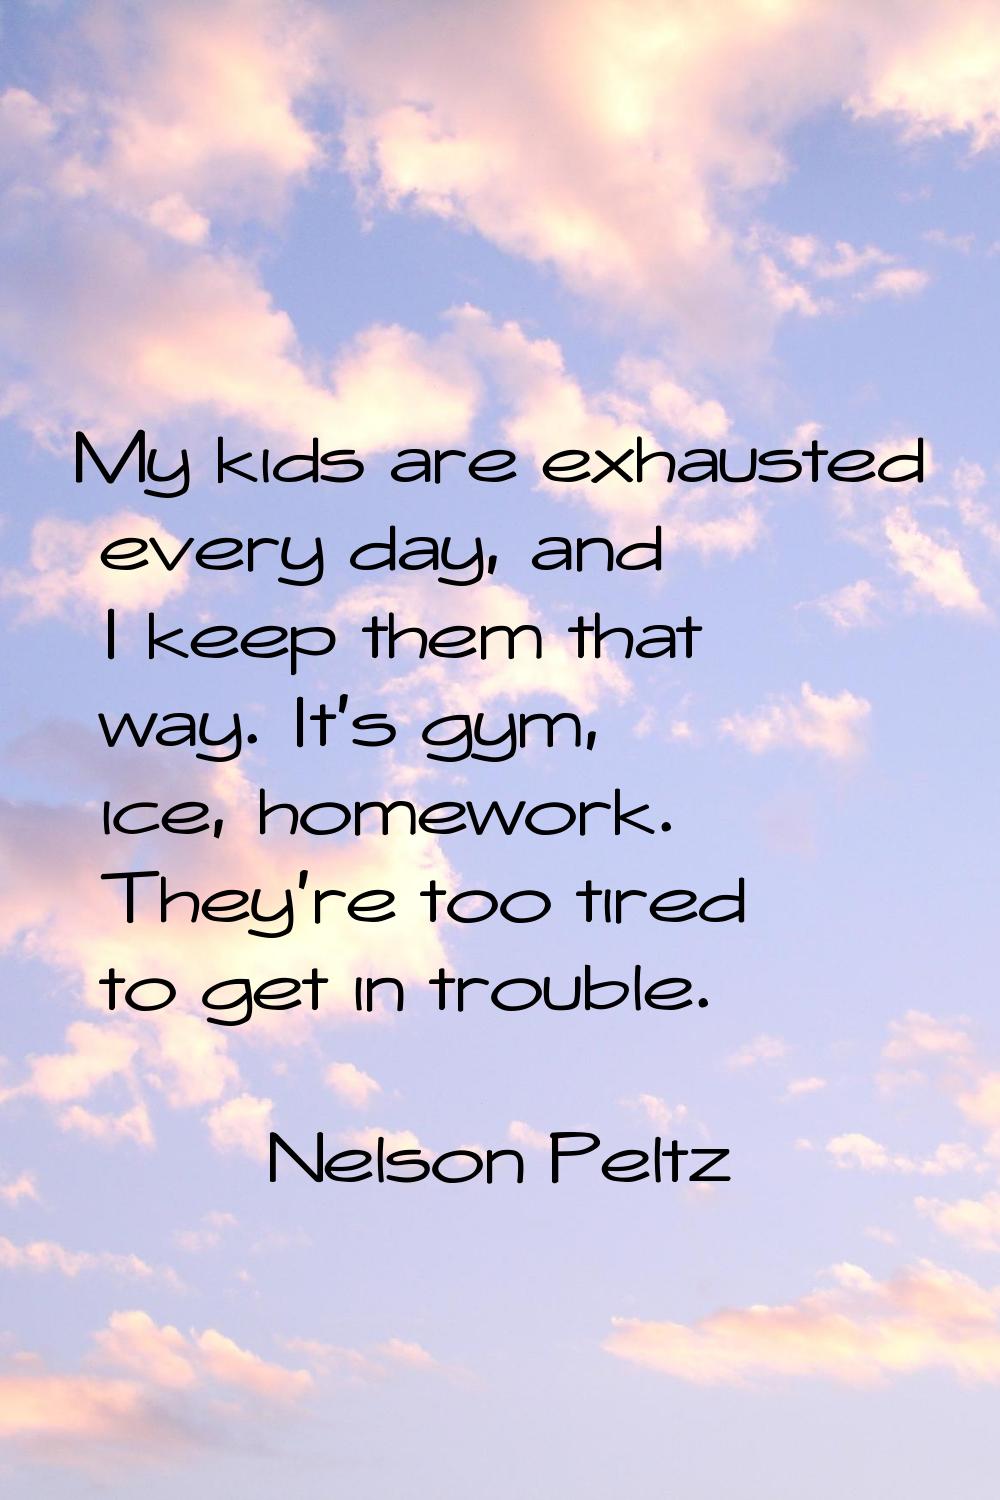 My kids are exhausted every day, and I keep them that way. It's gym, ice, homework. They're too tir